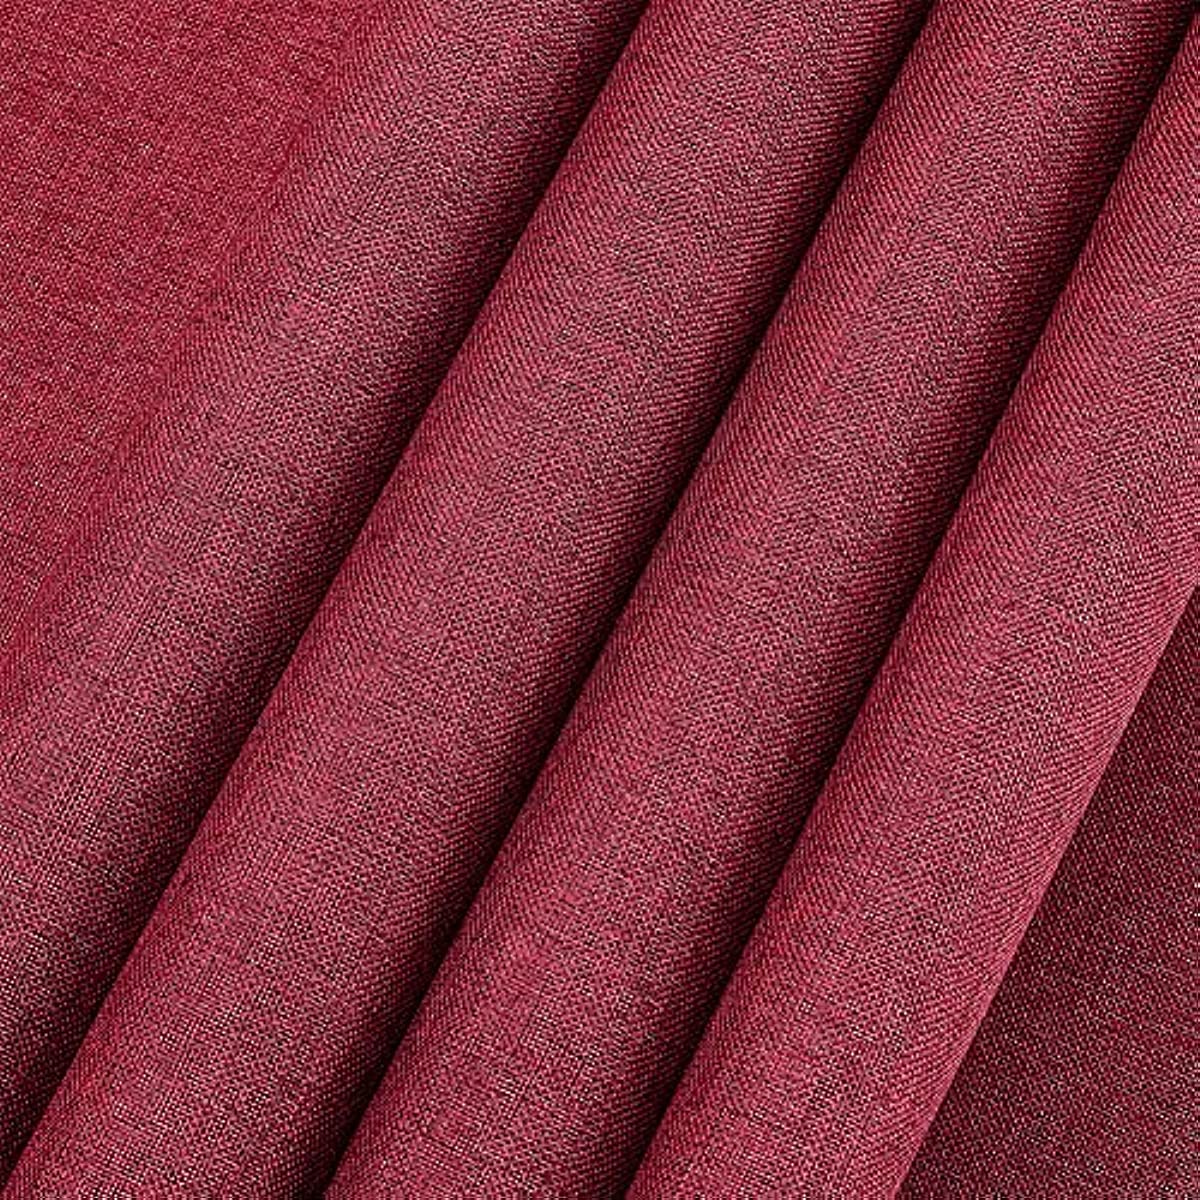 39.4x16.9 Inch Dark Red Book Binding Cloth Bookcover Fabric Surface with  Paper Backed Book Cloth Close-Weave Book Cloth for Book Binding  Scrapbooking